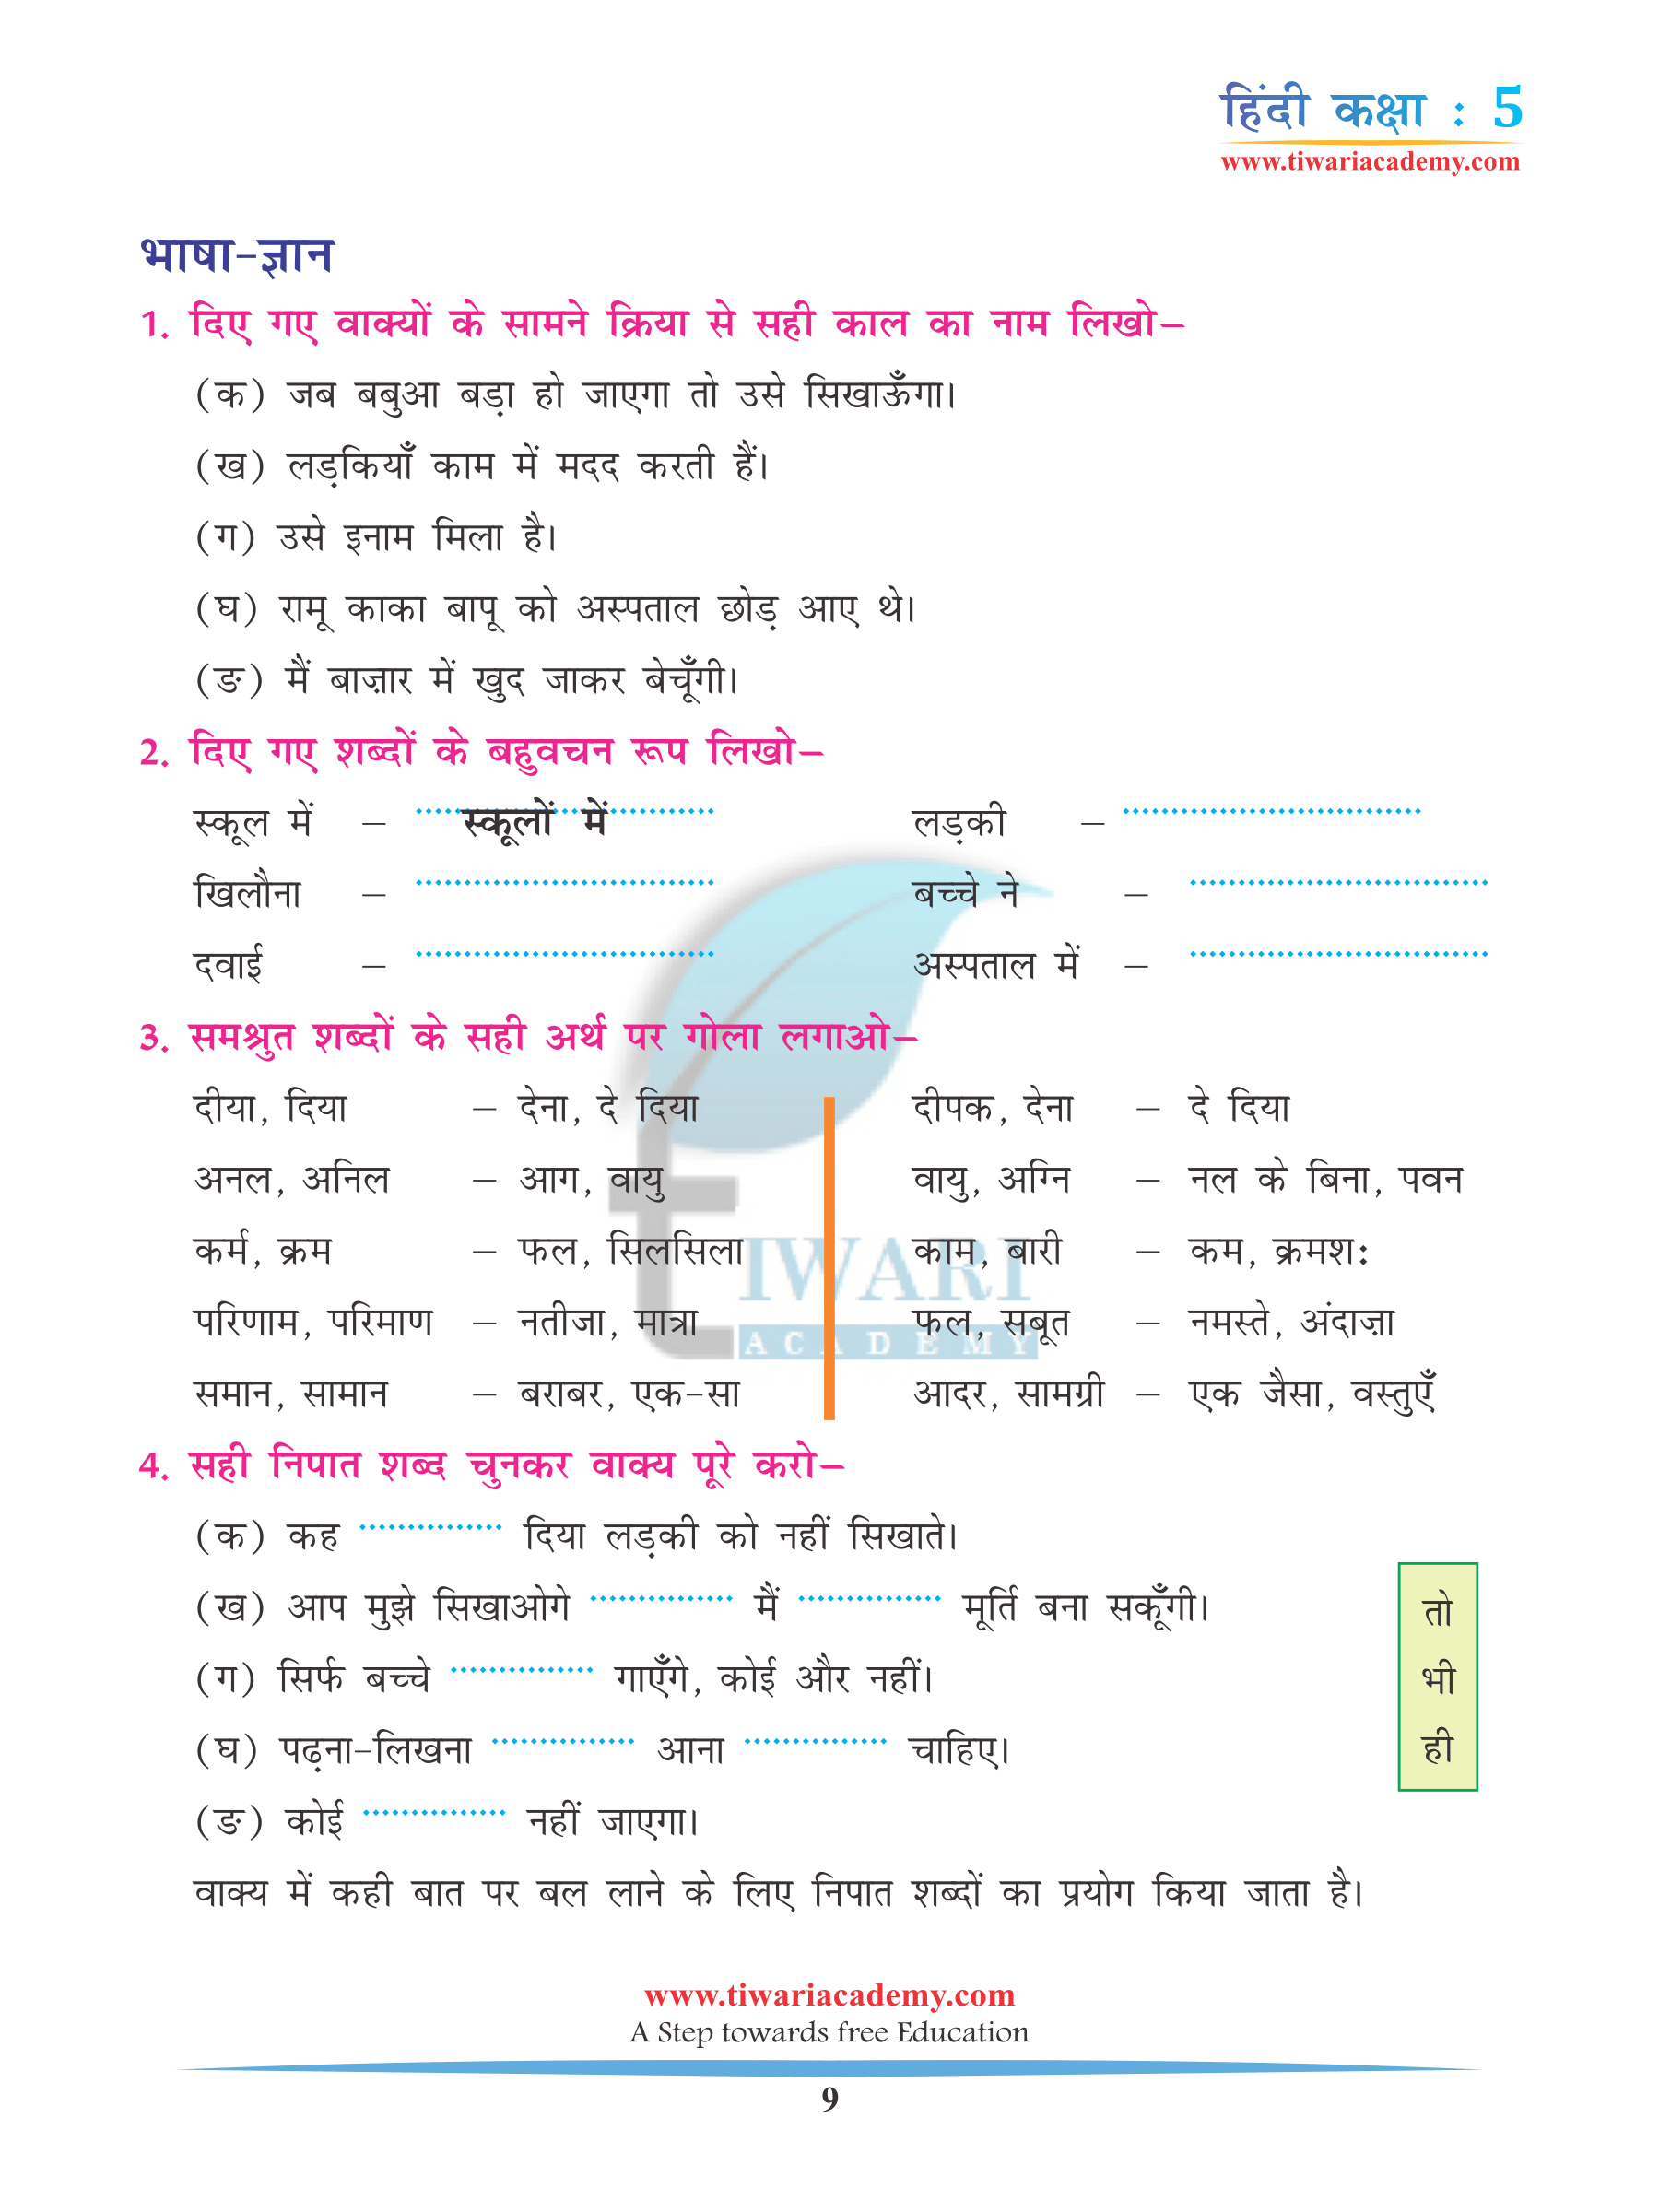 Class 5 Hindi Chapter 6 Revision Book